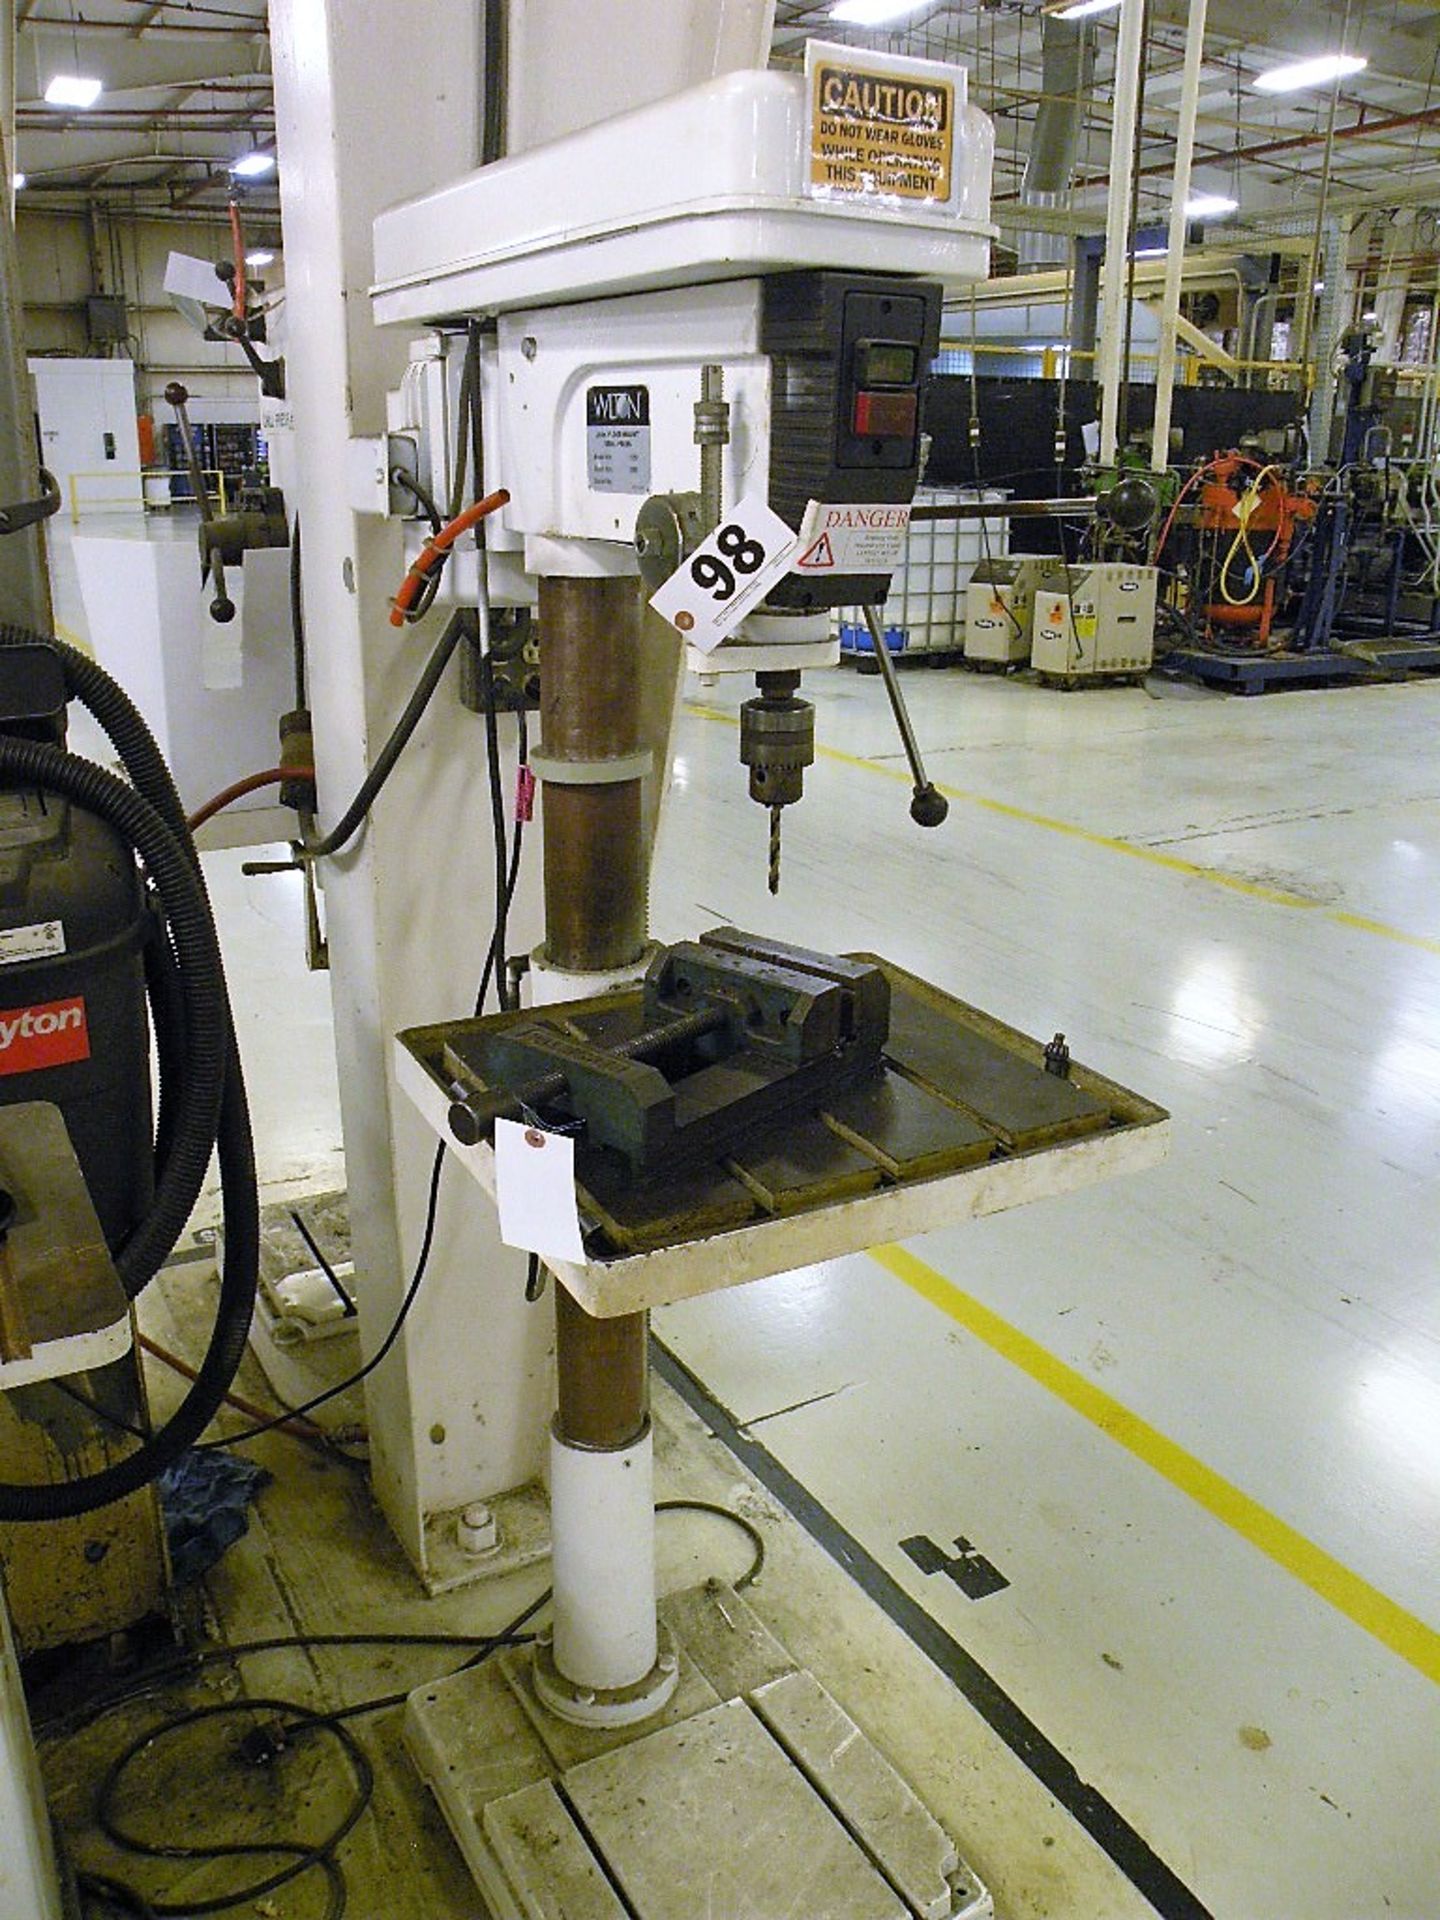 Wilton 20" Drill Press Model 2550 (Loading charge $20) (Late Delivery - Pick Up Week of June 4th) (